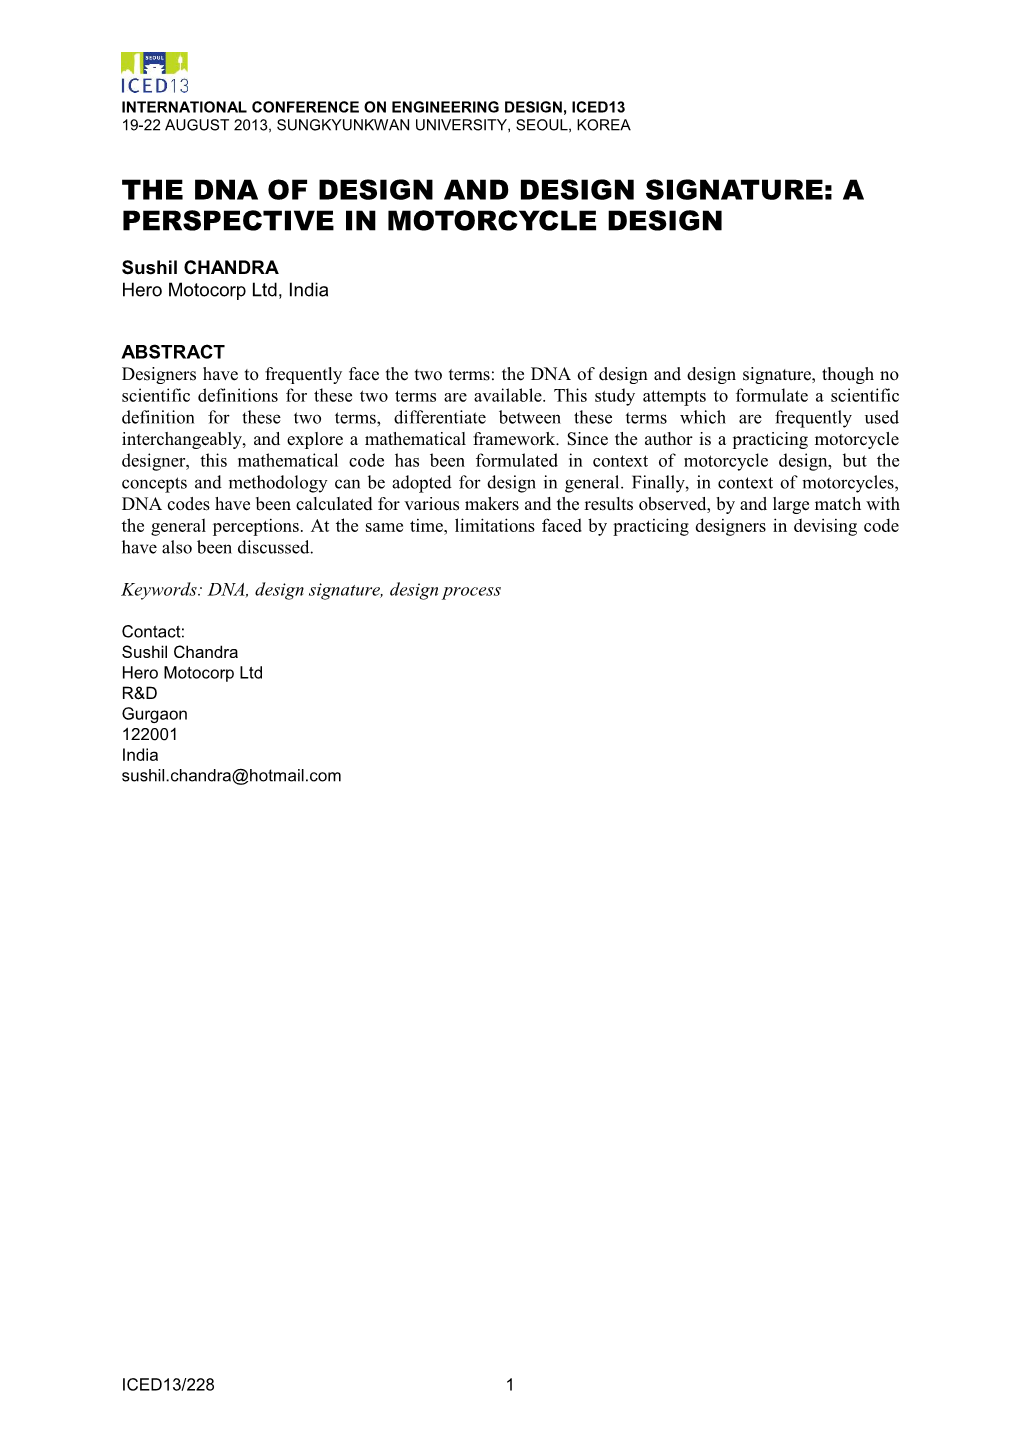 The Dna of Design and Design Signature: a Perspective in Motorcycle Design